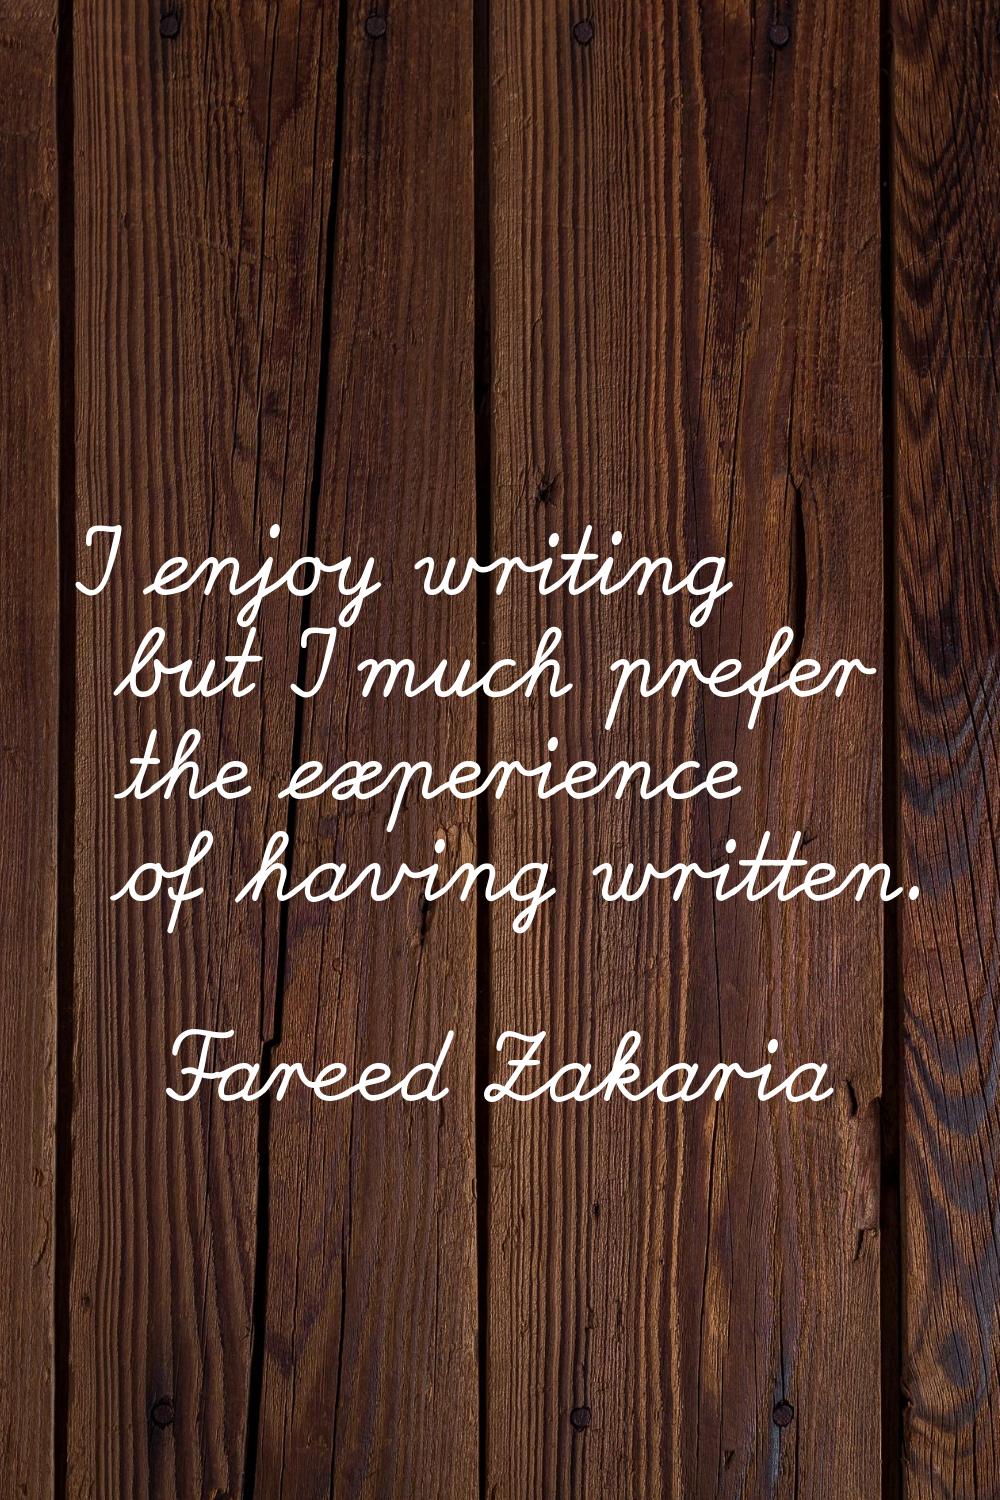 I enjoy writing but I much prefer the experience of having written.